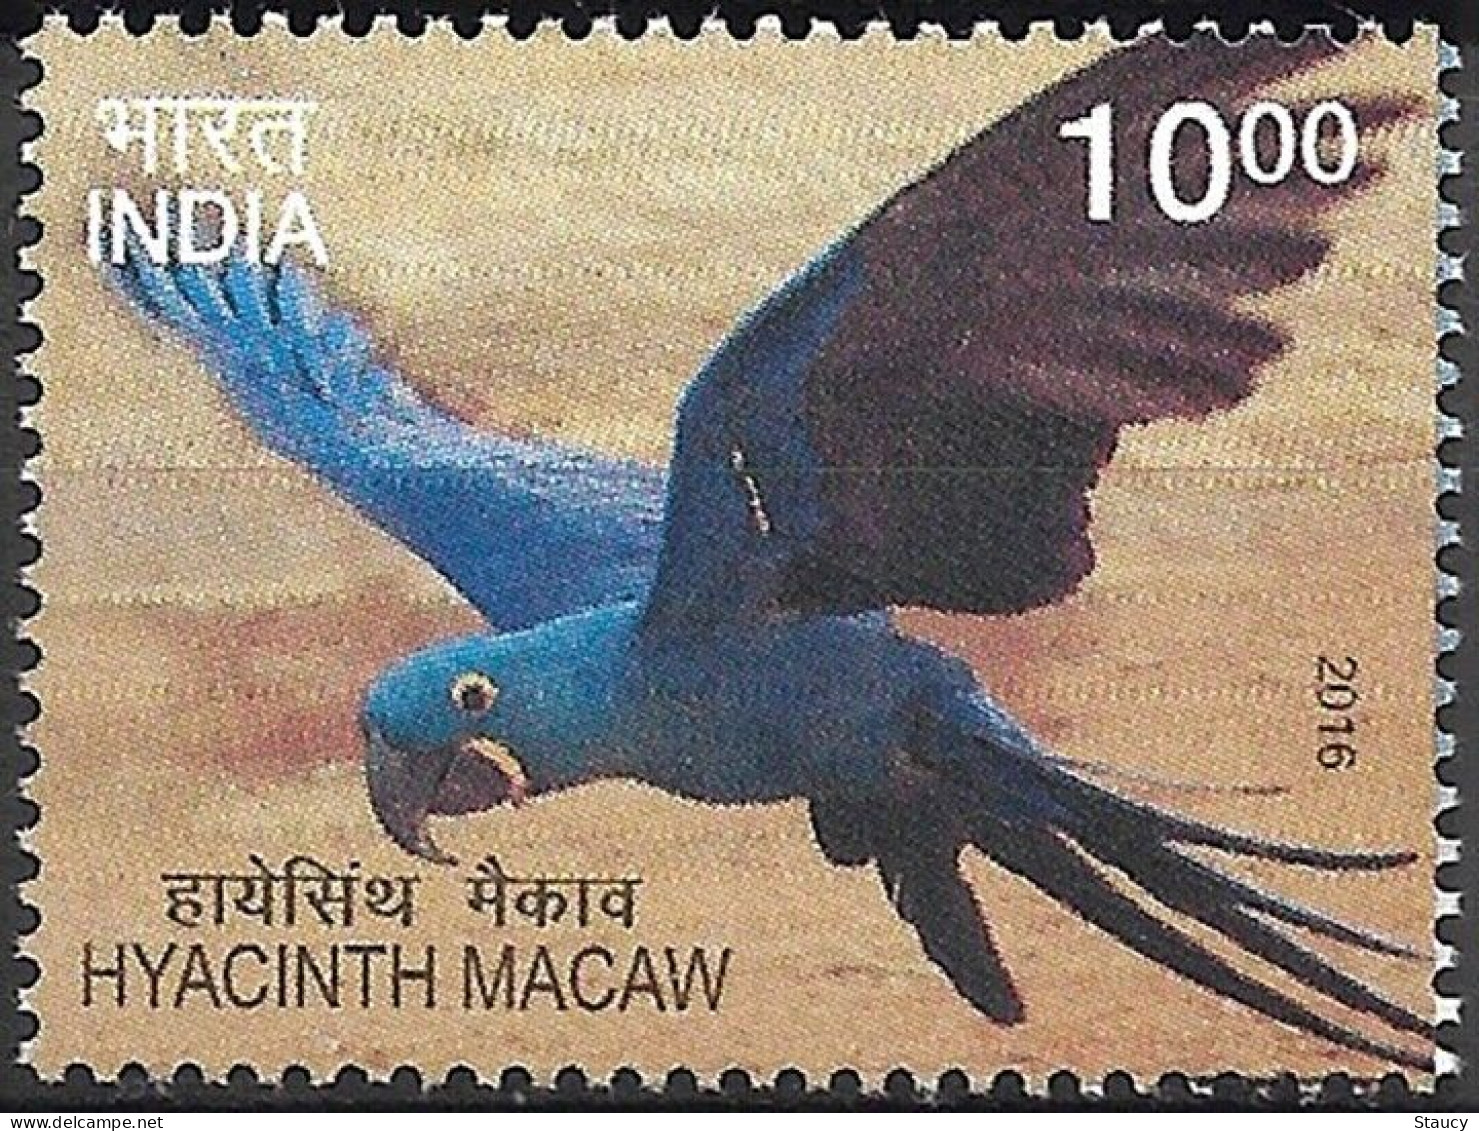 India 2016 Exotic Birds 1v Stamp MNH Macaw Parrot Amazon Crested, HYACINTH MACAW As Per Scan - Ongebruikt